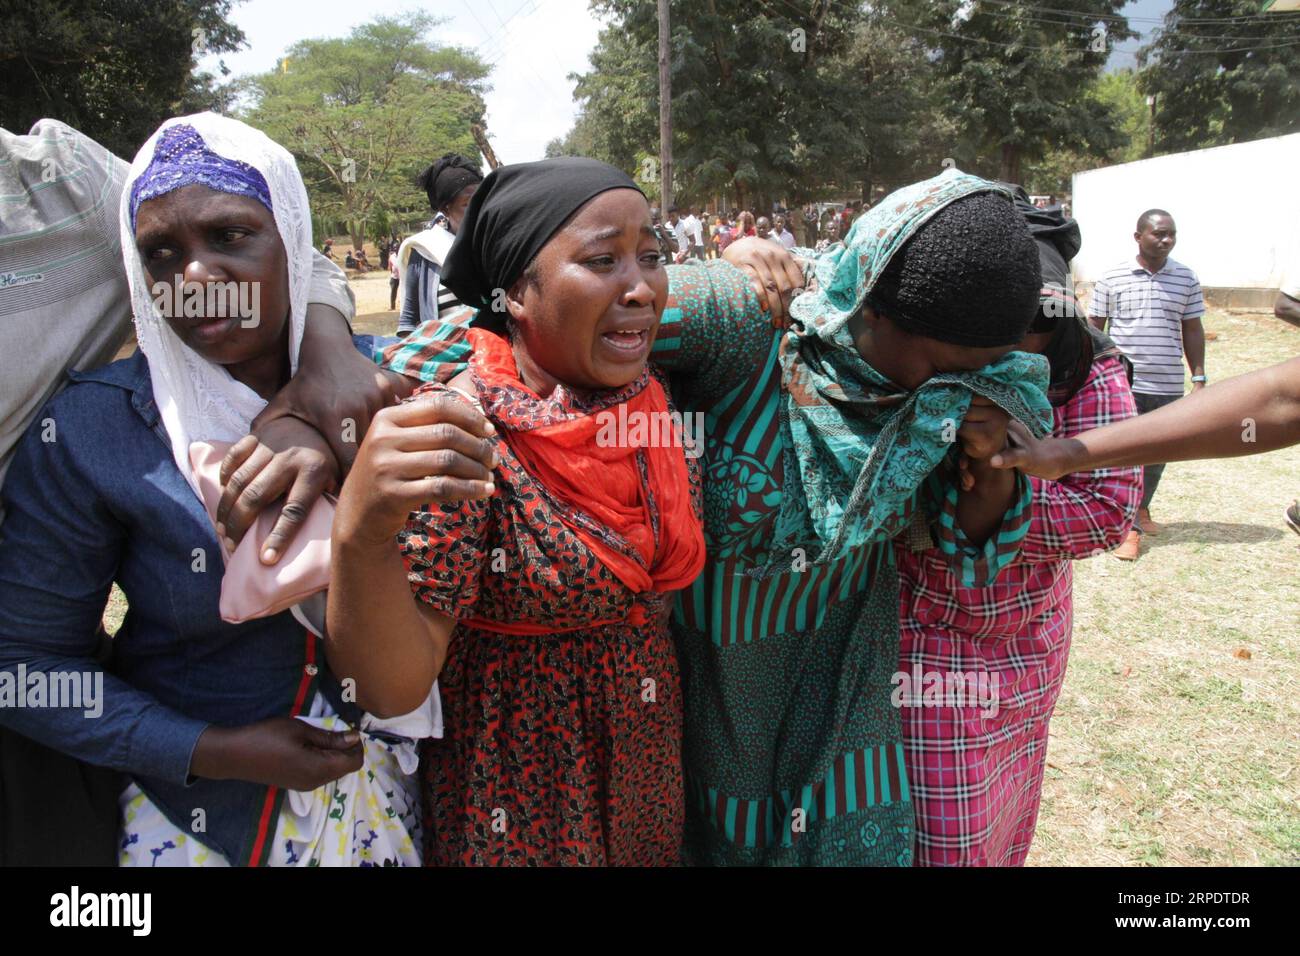 (190811) -- MOROGORO, Aug. 11, 2019 -- Relatives of tanker explosion victims cry in a burial ceremony in Morogoro, Tanzania on Aug. 11, 2019. Tanzanian President John Magufuli has declared three days of national mourning following an oil tanker explosion that killed over 60 people and injured 70 others in Morogoro on Saturday, said a statement released early Sunday. TANZANIA-MOROGORO-TANKER-EXPLOSION-MOURNING Lisibo PUBLICATIONxNOTxINxCHN Stock Photo